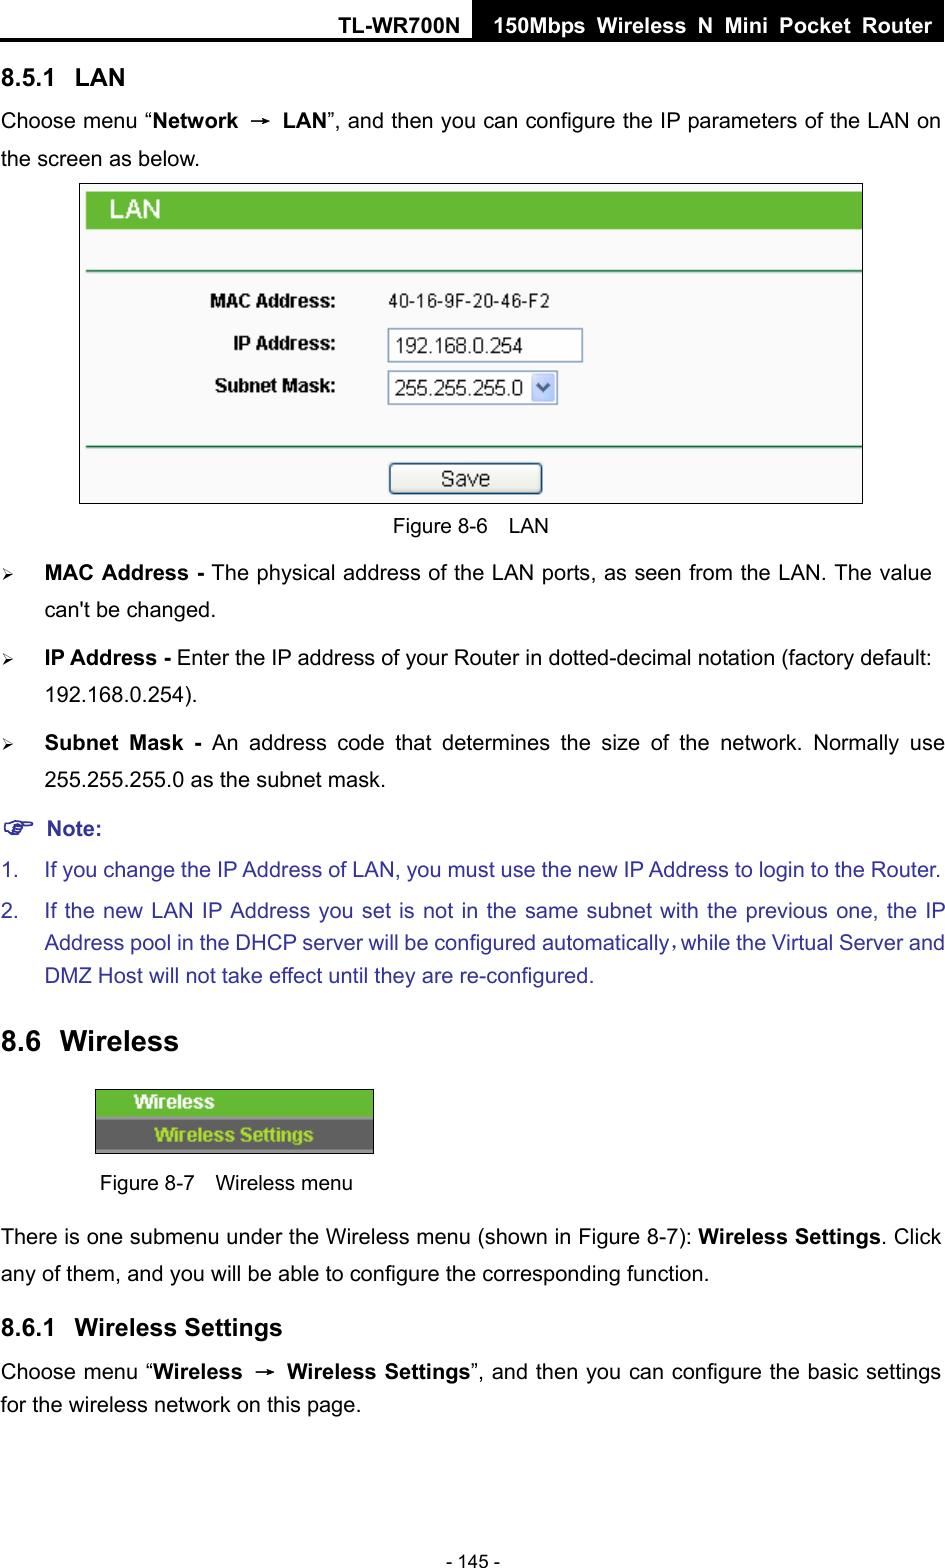 TL-WR700N 150Mbps Wireless N Mini Pocket Router - 145 - 8.5.1  LAN Choose menu “Network  → LAN”, and then you can configure the IP parameters of the LAN on the screen as below.  Figure 8-6  LAN ¾ MAC Address - The physical address of the LAN ports, as seen from the LAN. The value can&apos;t be changed. ¾ IP Address - Enter the IP address of your Router in dotted-decimal notation (factory default: 192.168.0.254). ¾ Subnet Mask - An address code that determines the size of the network. Normally use 255.255.255.0 as the subnet mask.   ) Note: 1.  If you change the IP Address of LAN, you must use the new IP Address to login to the Router.   2.  If the new LAN IP Address you set is not in the same subnet with the previous one, the IP Address pool in the DHCP server will be configured automatically，while the Virtual Server and DMZ Host will not take effect until they are re-configured. 8.6  Wireless  Figure 8-7    Wireless menu There is one submenu under the Wireless menu (shown in Figure 8-7): Wireless Settings. Click any of them, and you will be able to configure the corresponding function.   8.6.1  Wireless Settings Choose menu “Wireless  → Wireless Settings”, and then you can configure the basic settings for the wireless network on this page. 